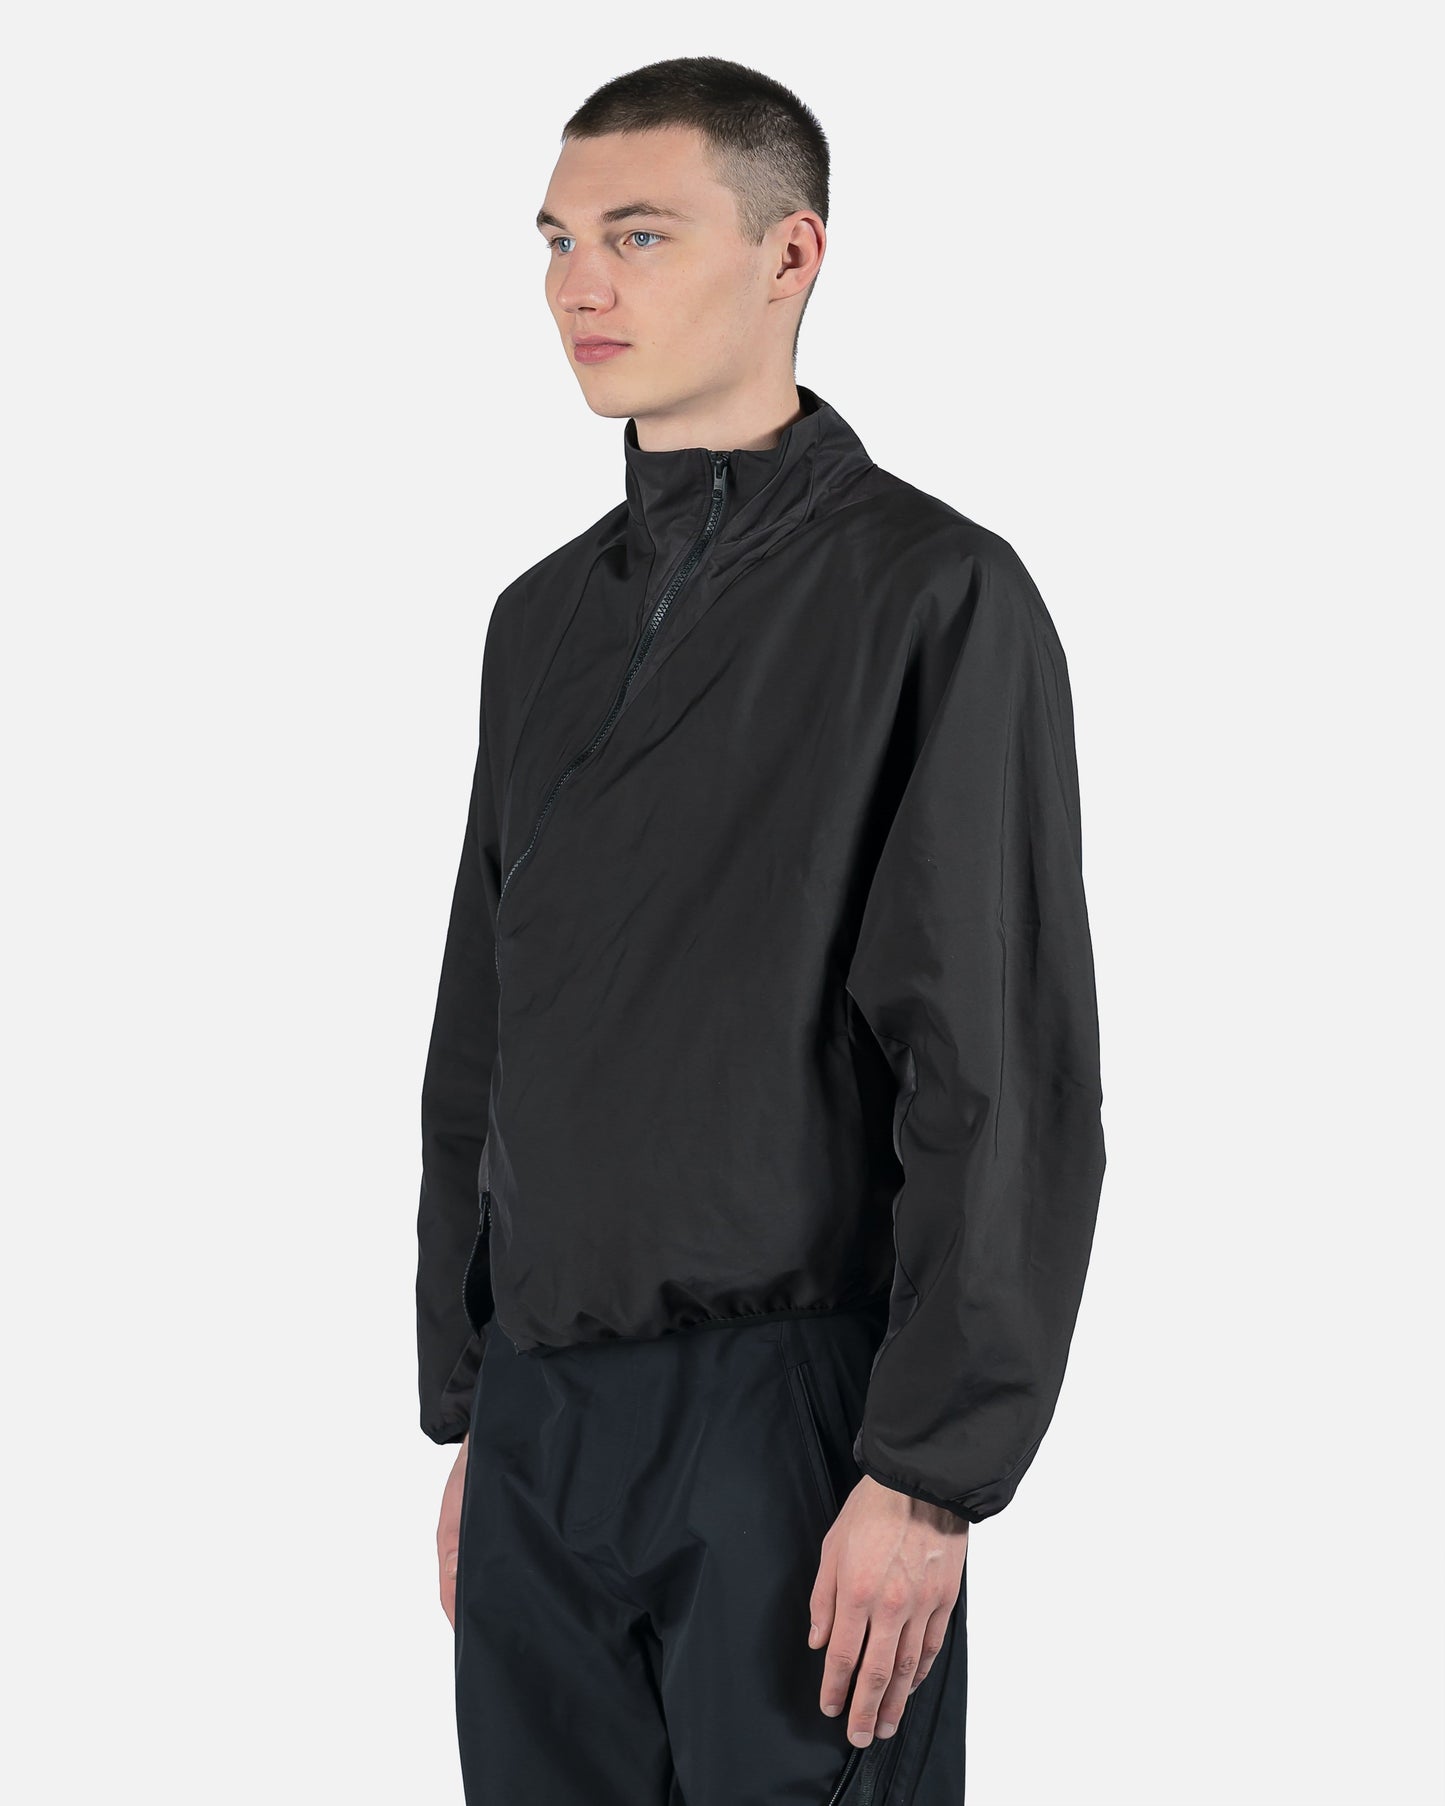 POST ARCHIVE FACTION (P.A.F) Men's Jackets 4.0+ Technical Jacket Right in Black